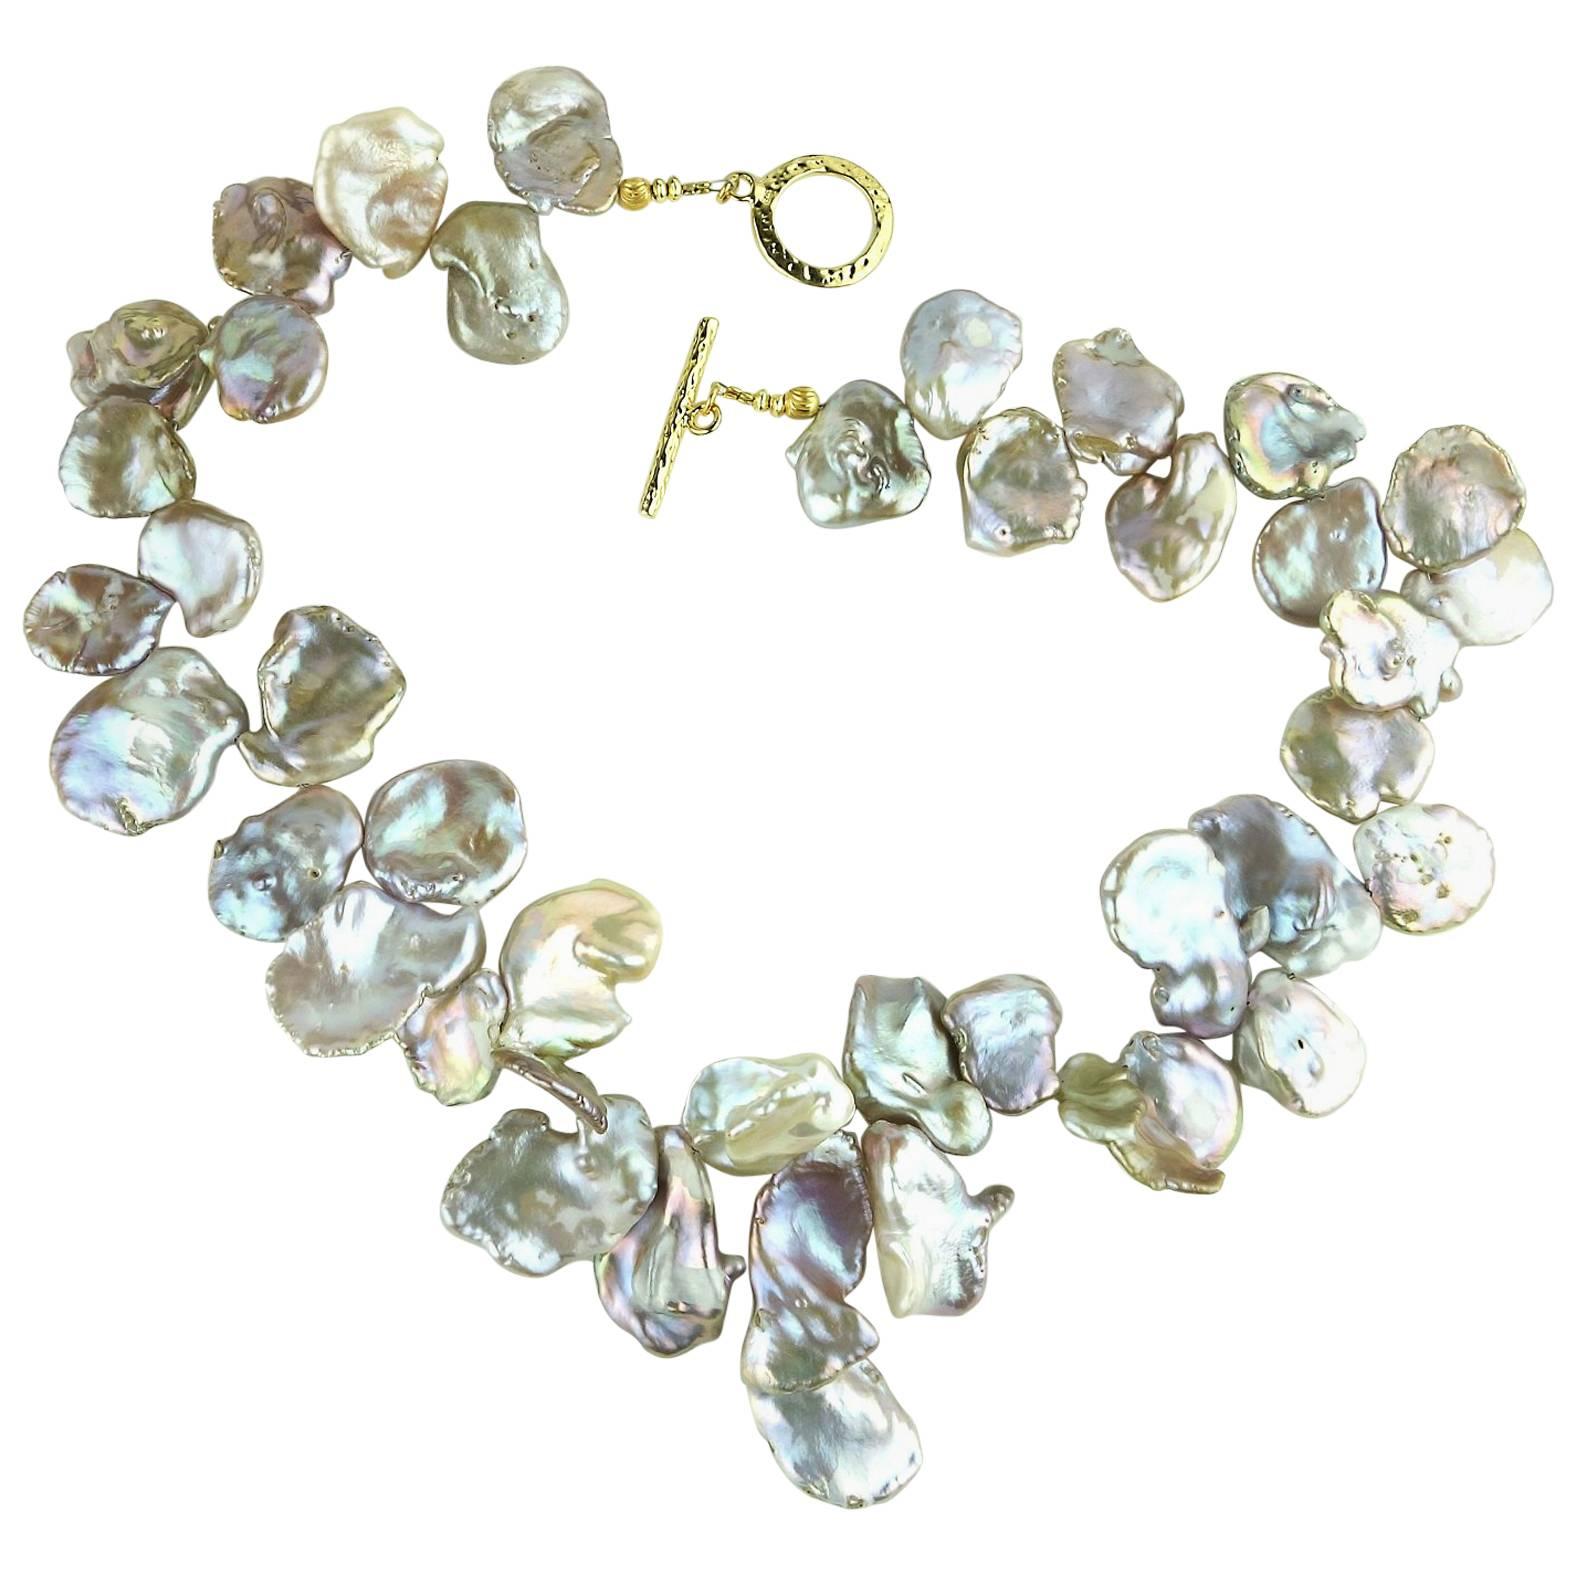 Iridescent Keshi Pearl Necklace